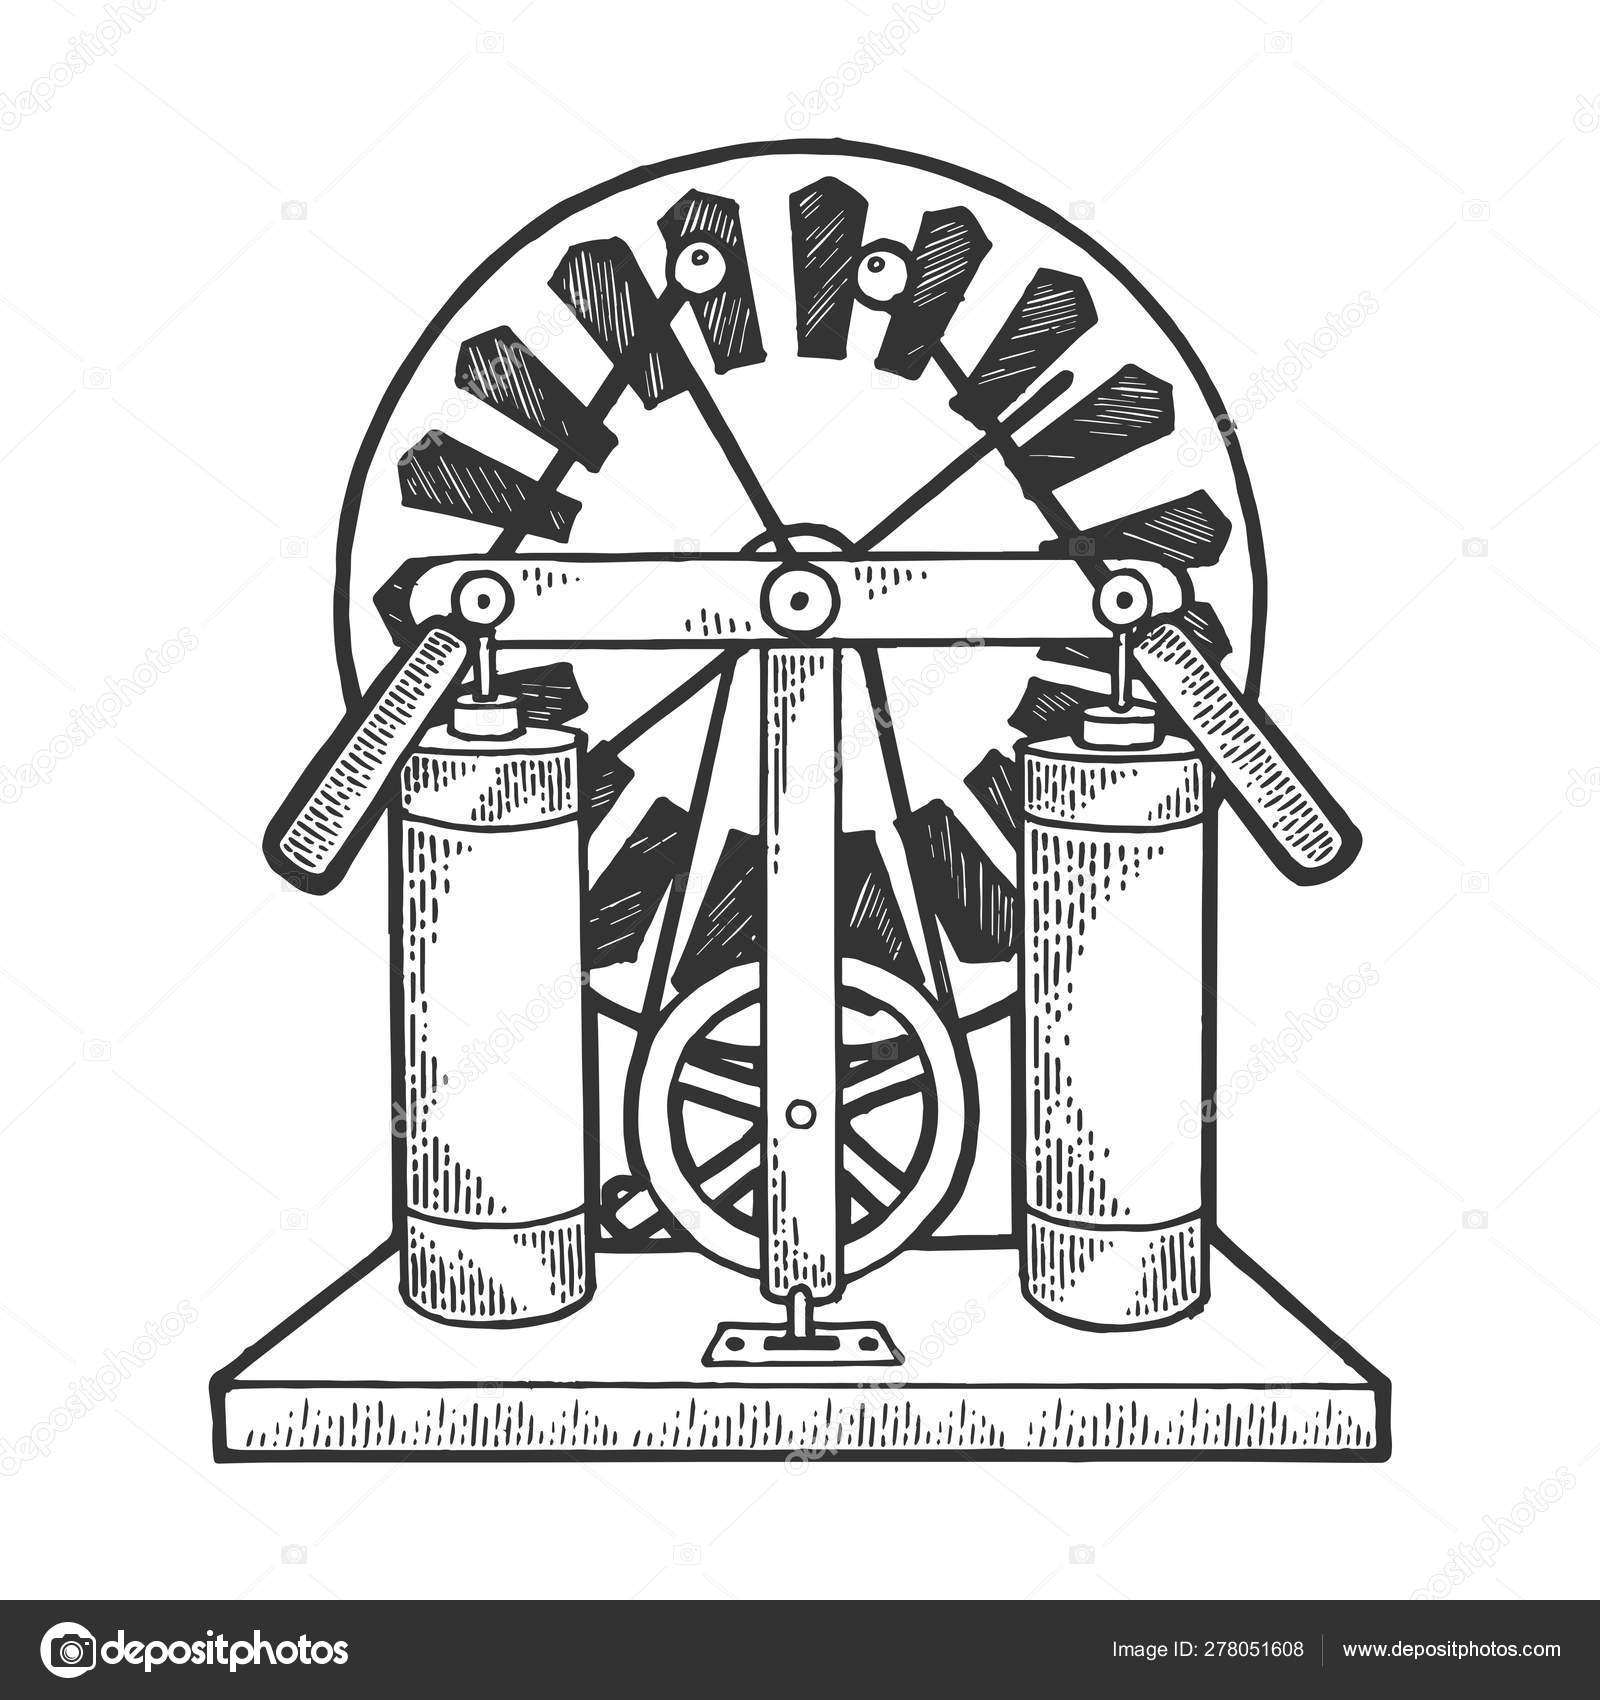 Wimshurst machine electrostatic generator sketch engraving vector  illustration. Scratch board style imitation. Hand drawn image. Stock Vector  by ©AlexanderPokusay 278051608